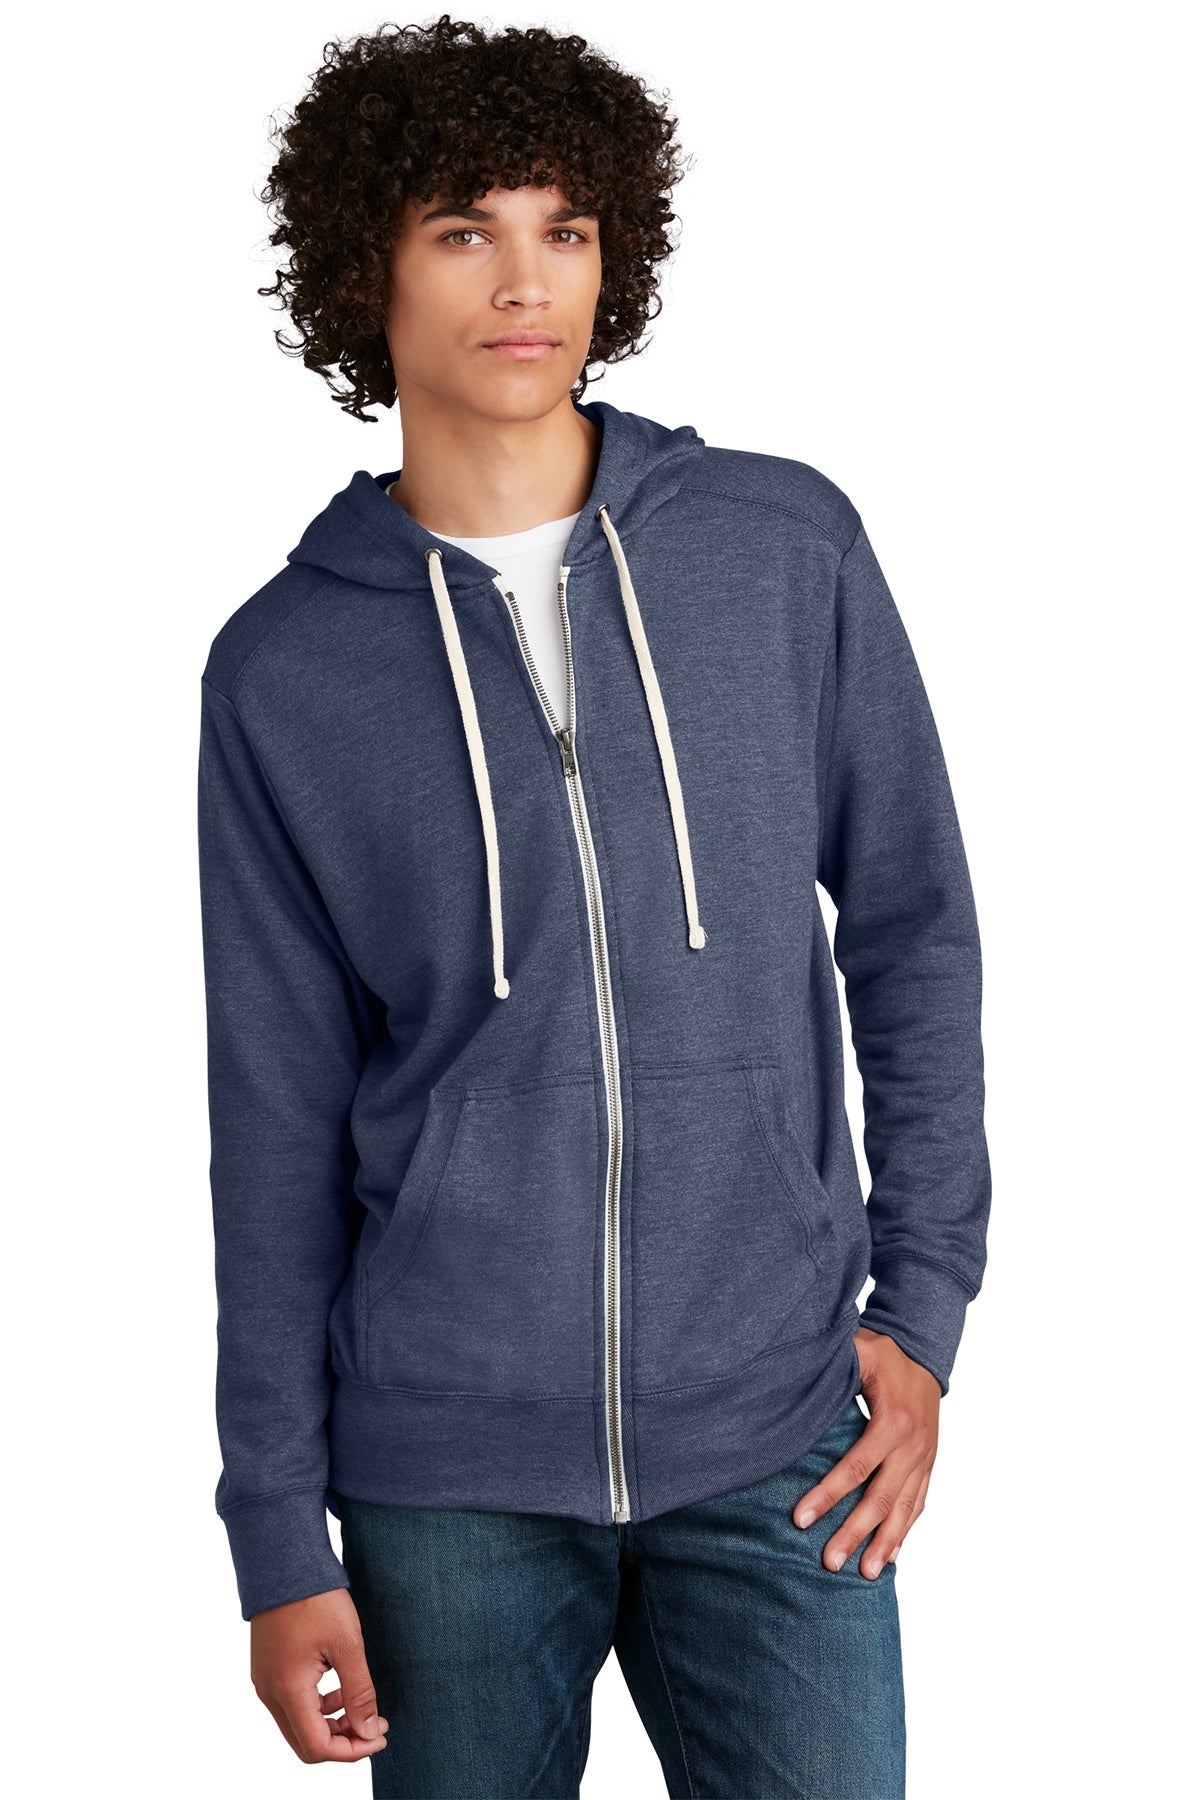 DT356 District ® Perfect Tri ® French Terry Full-Zip Hoodie